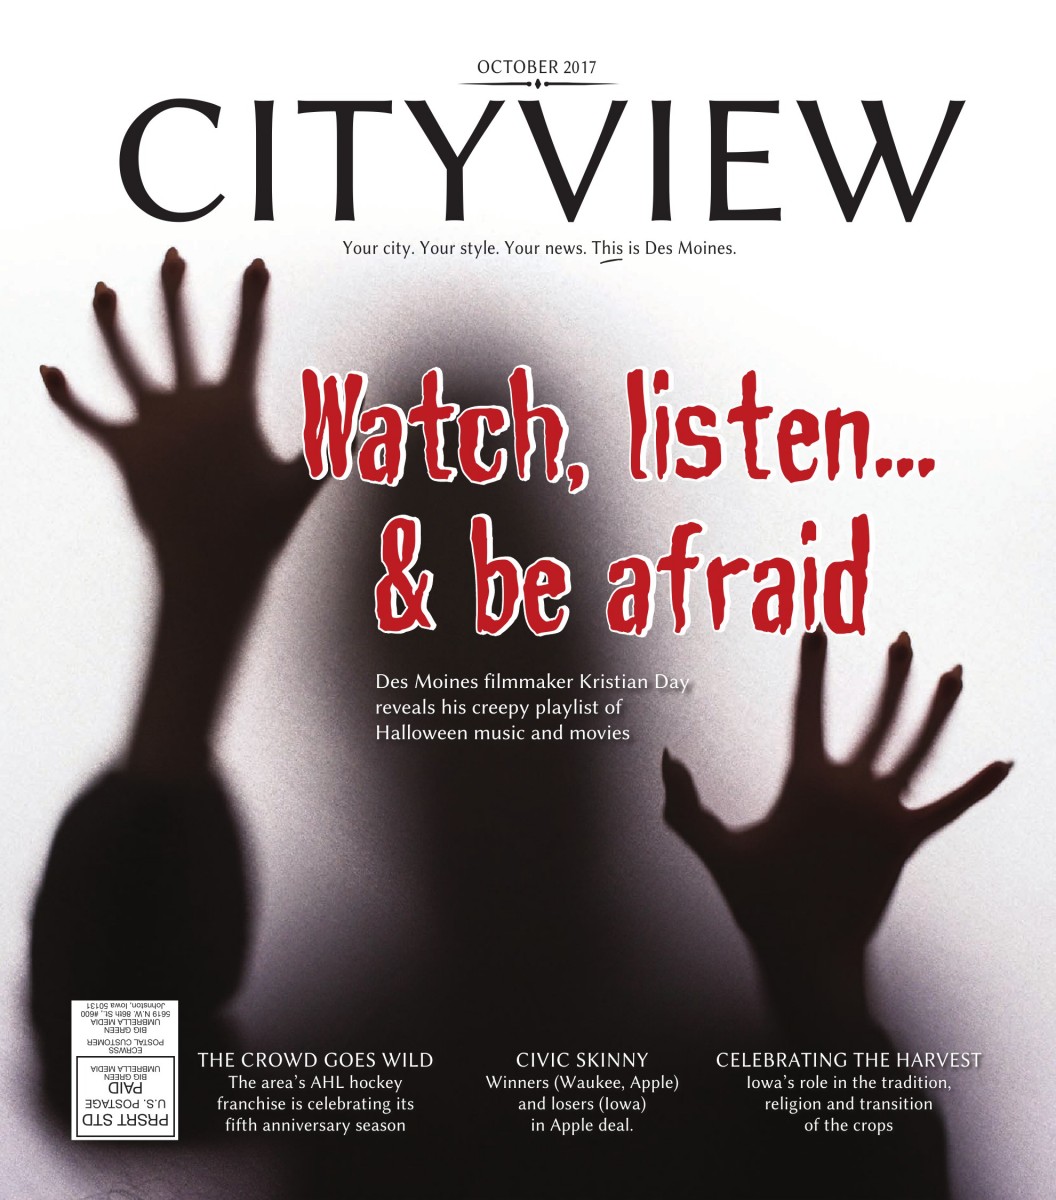 http://www.dmcityview.com/CityviewOctober2017/files/pages/tablet/1.jpg